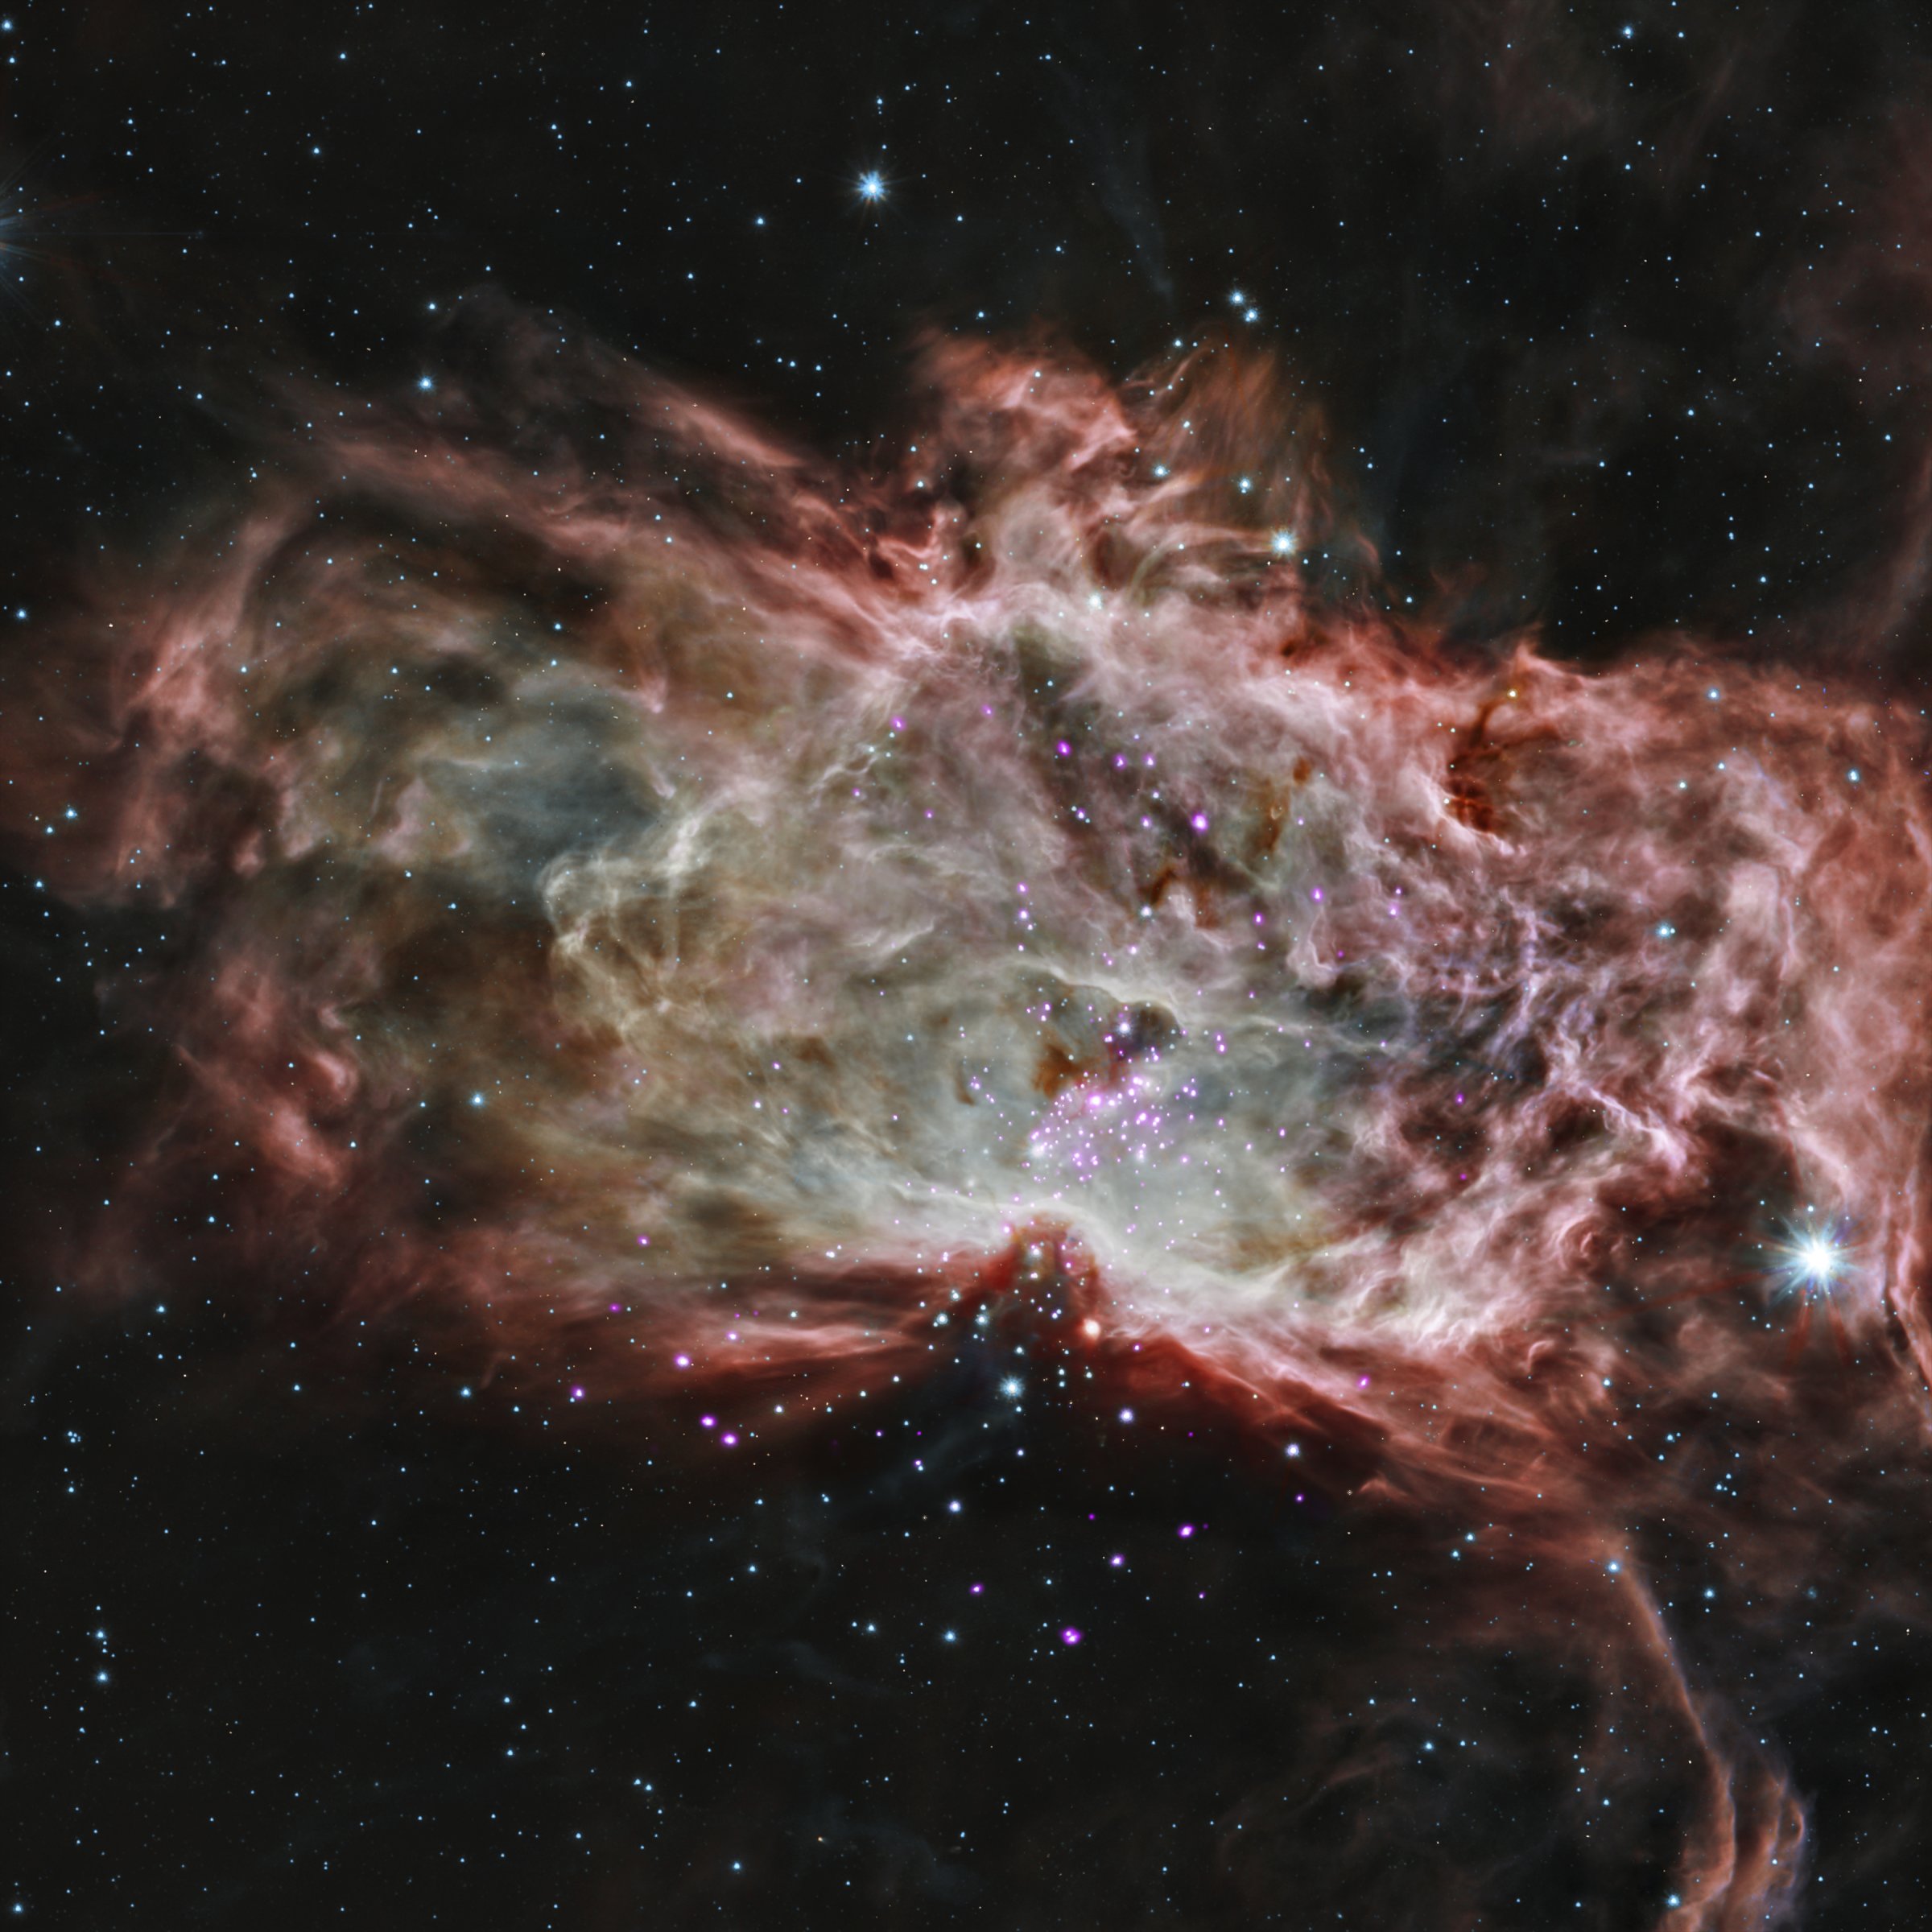 This composite image released by NASA on May 7, 2014 shows NGC 2024, which is found in the center of the so-called Flame Nebula about 1,400 light years from Earth.